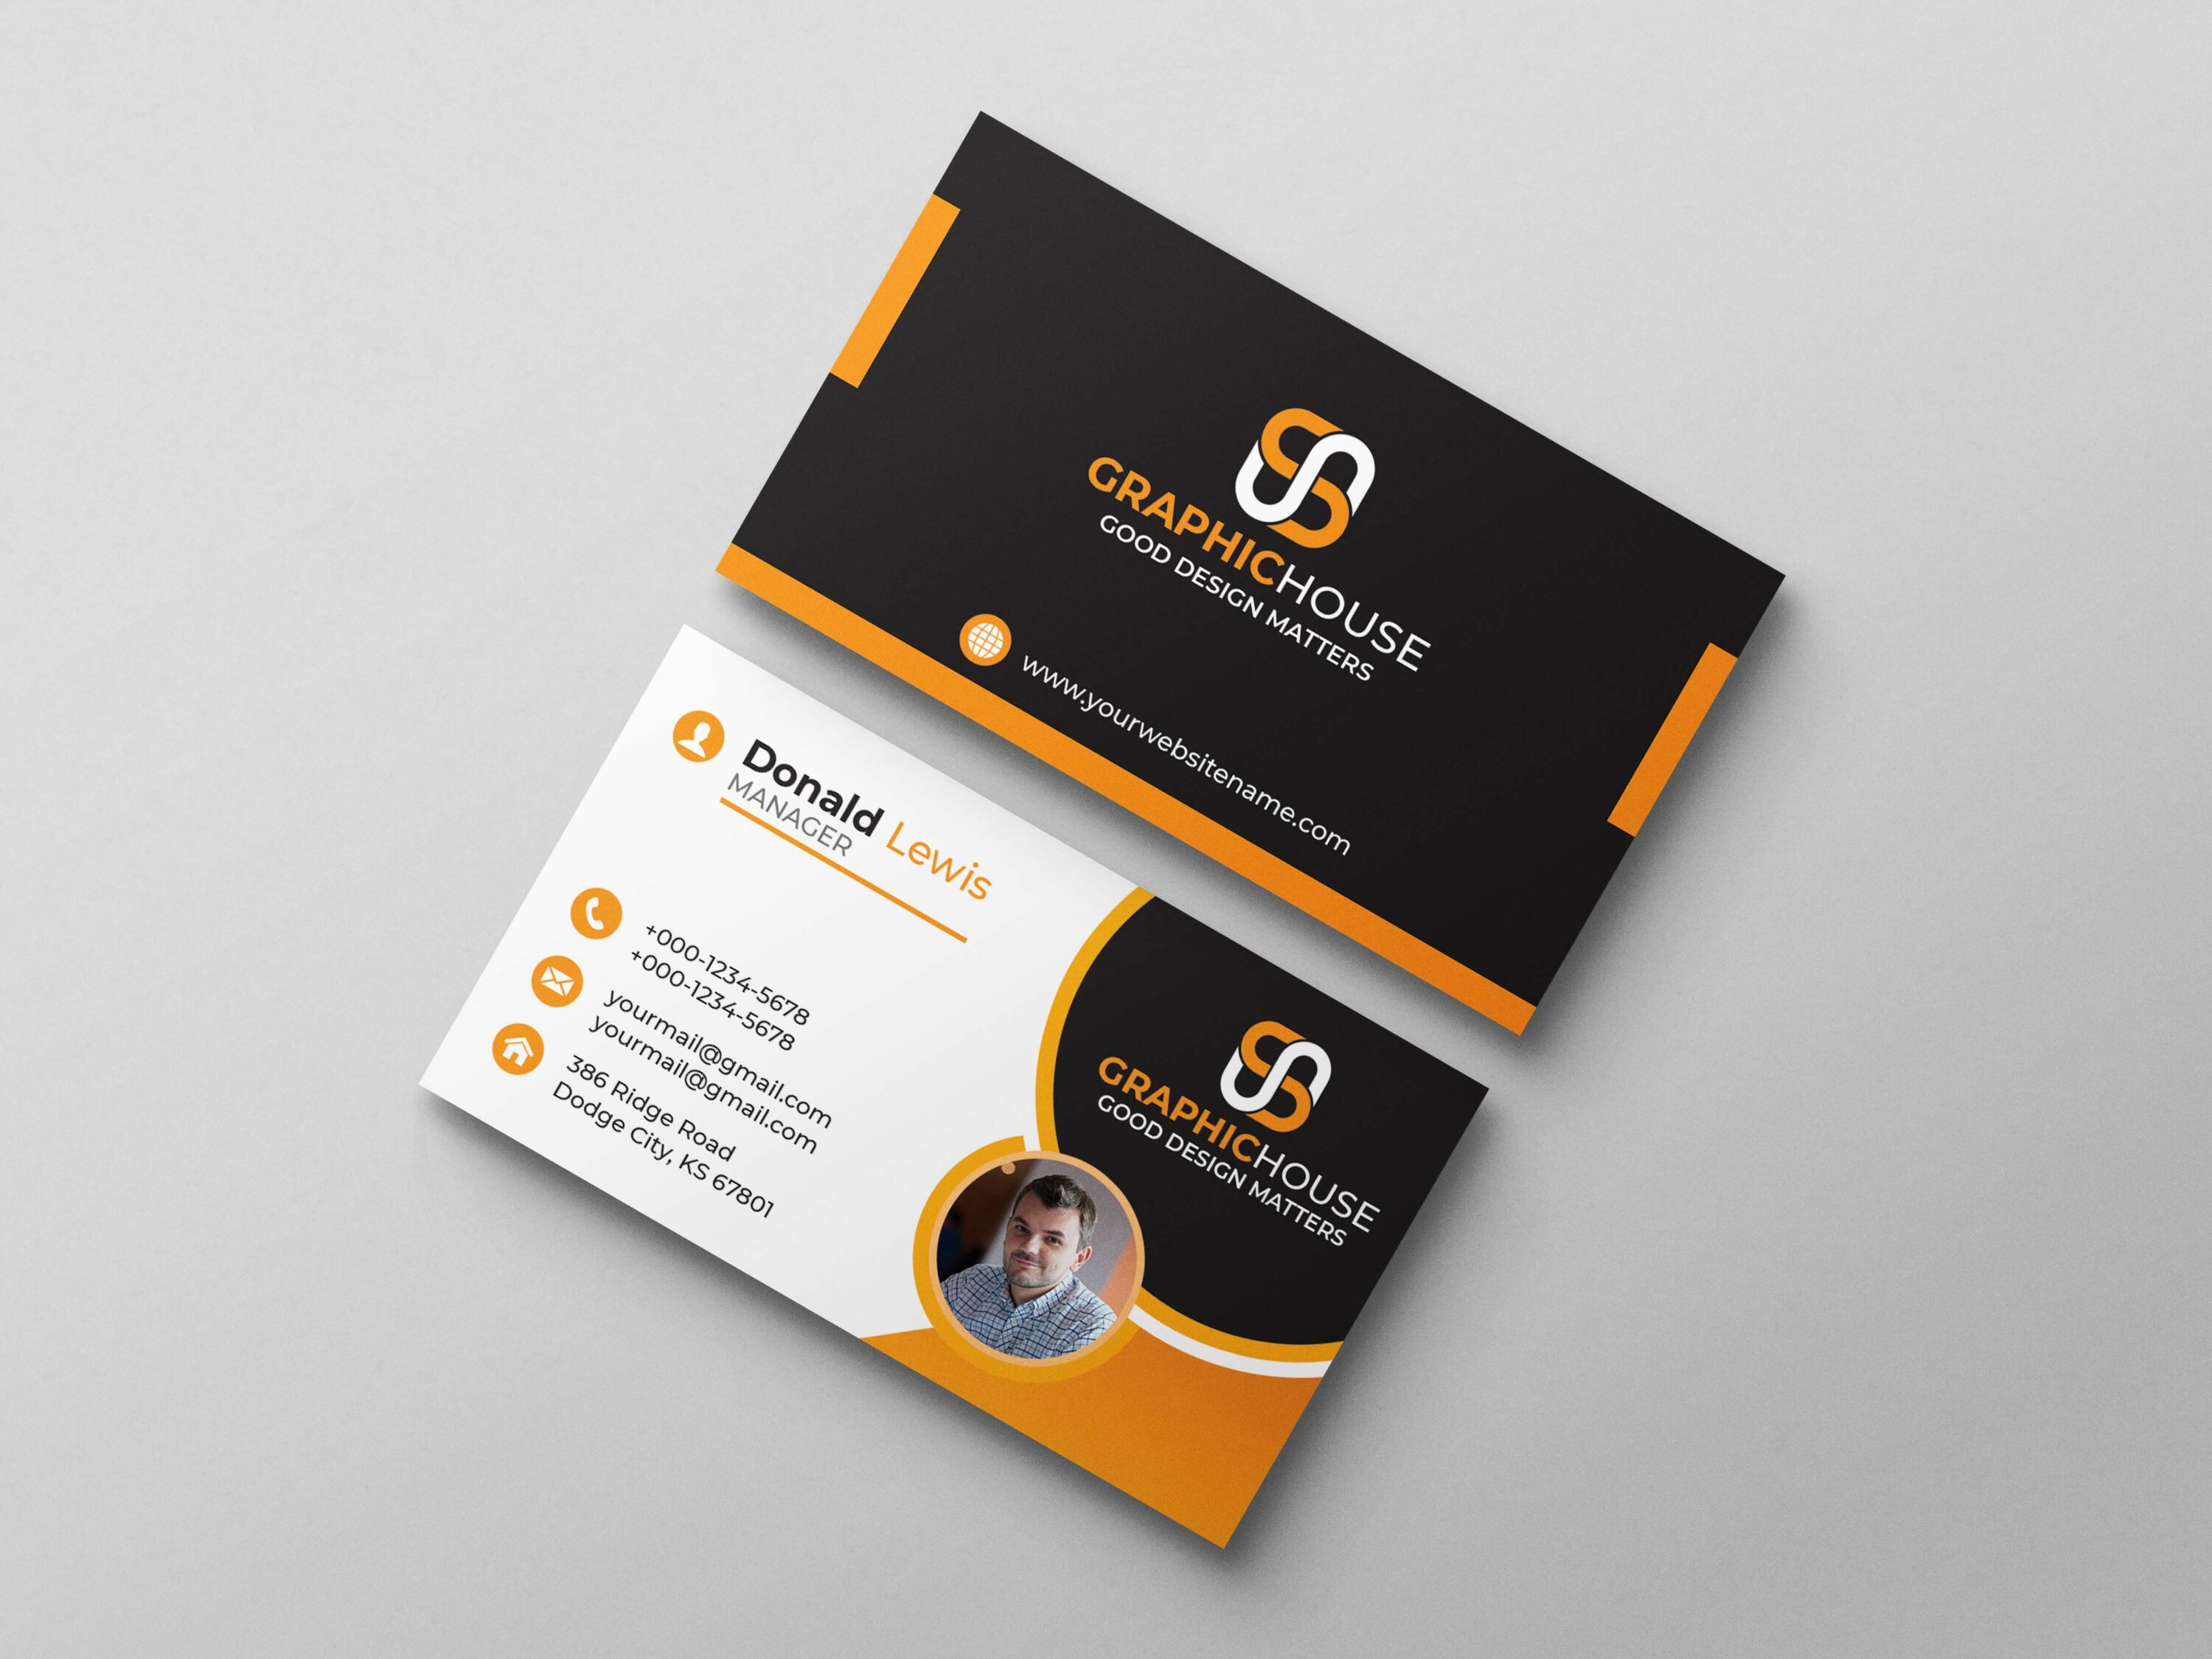 Creative Professional Business Card Template Mockup Example.